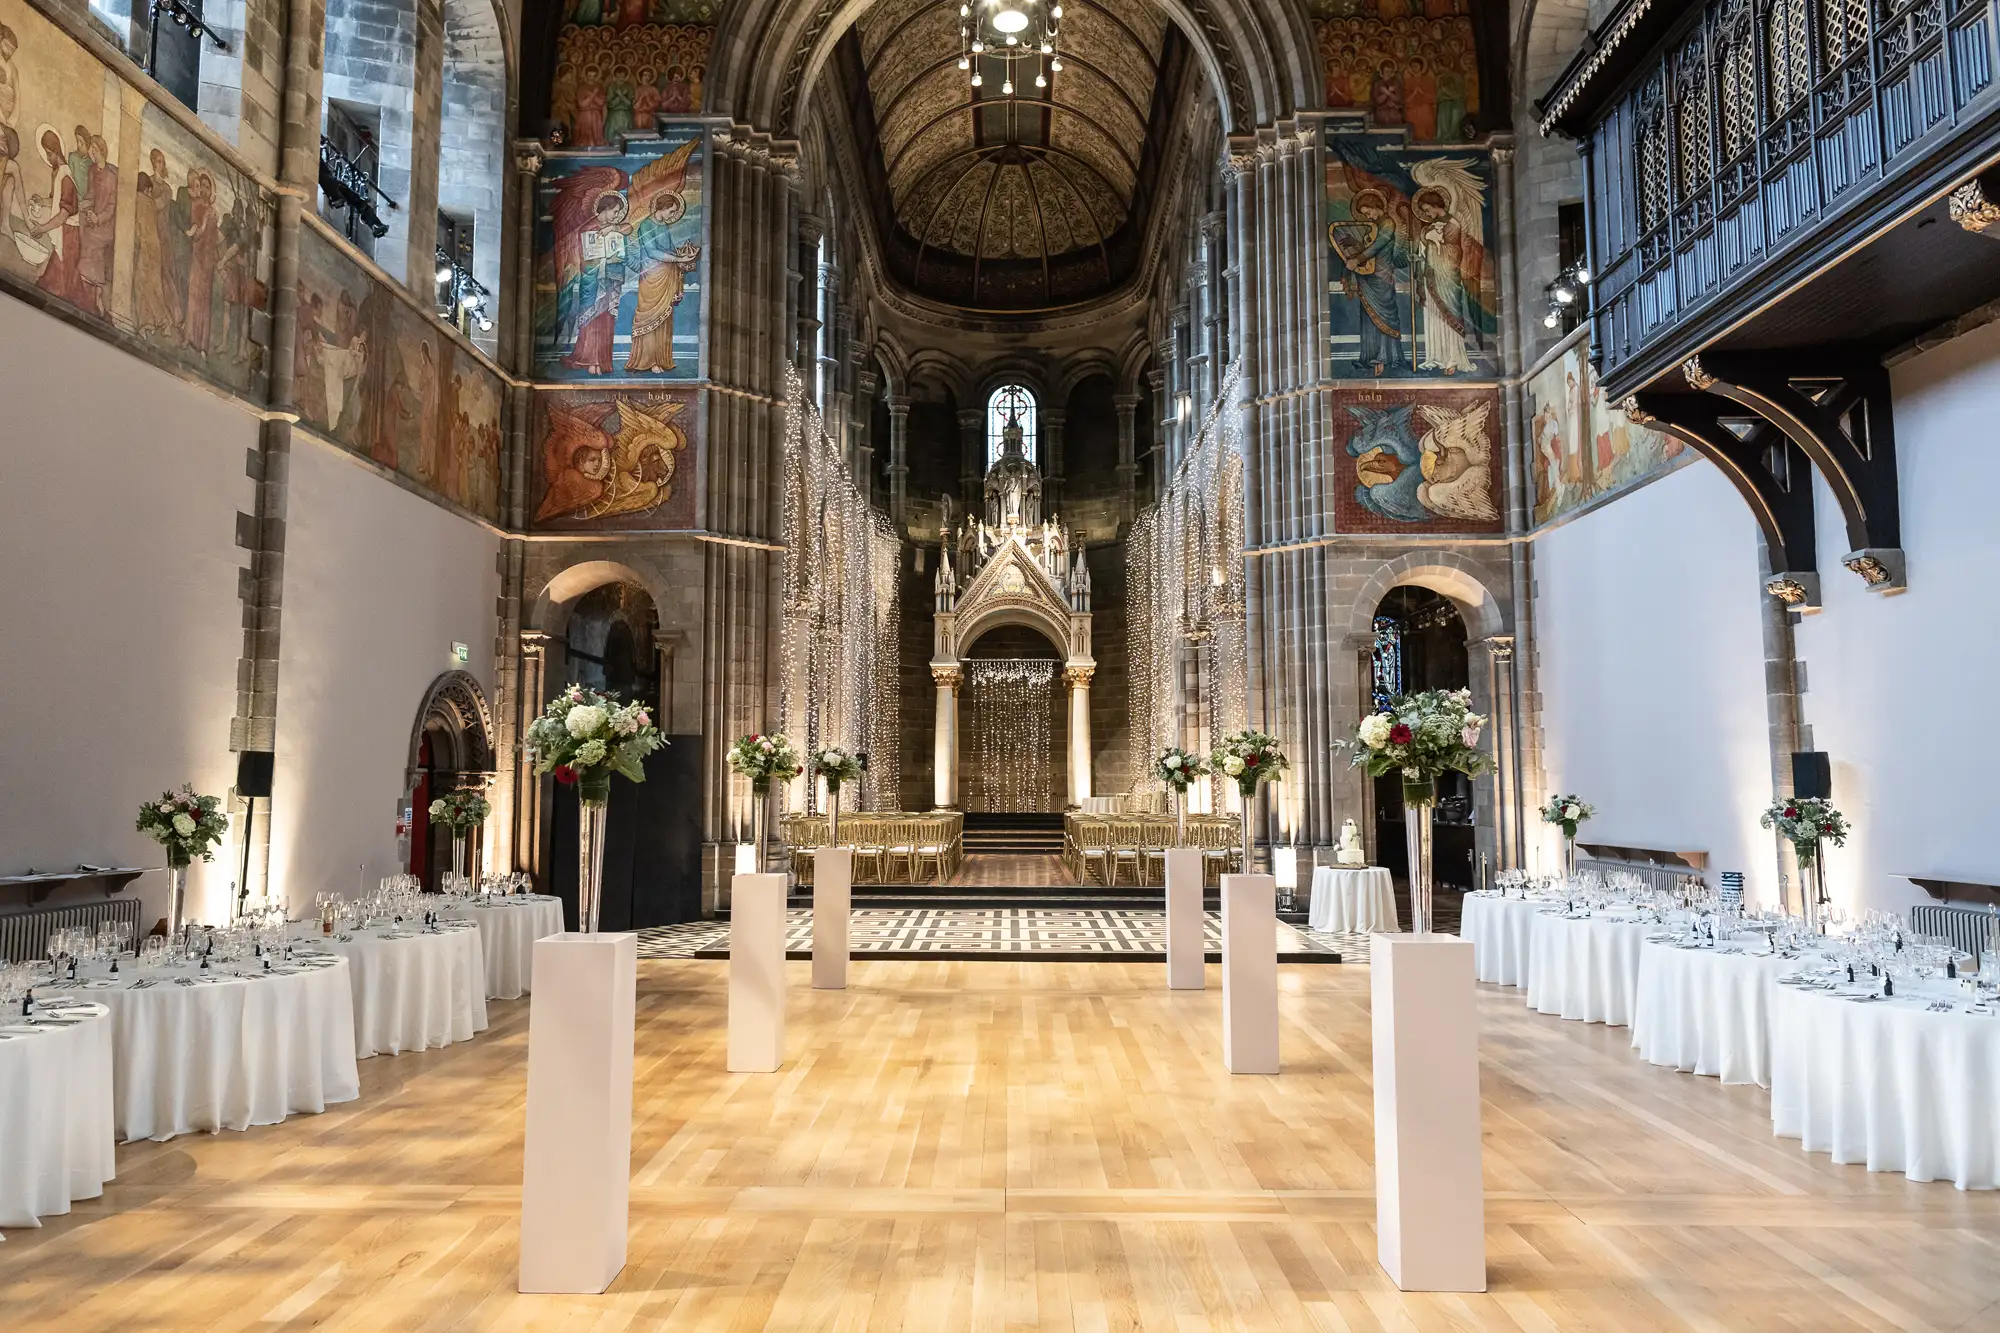 Elegant dining setup in a historic church with frescoed walls, ornate stained glass, and a grand altar, featuring white linen tables and floral arrangements.